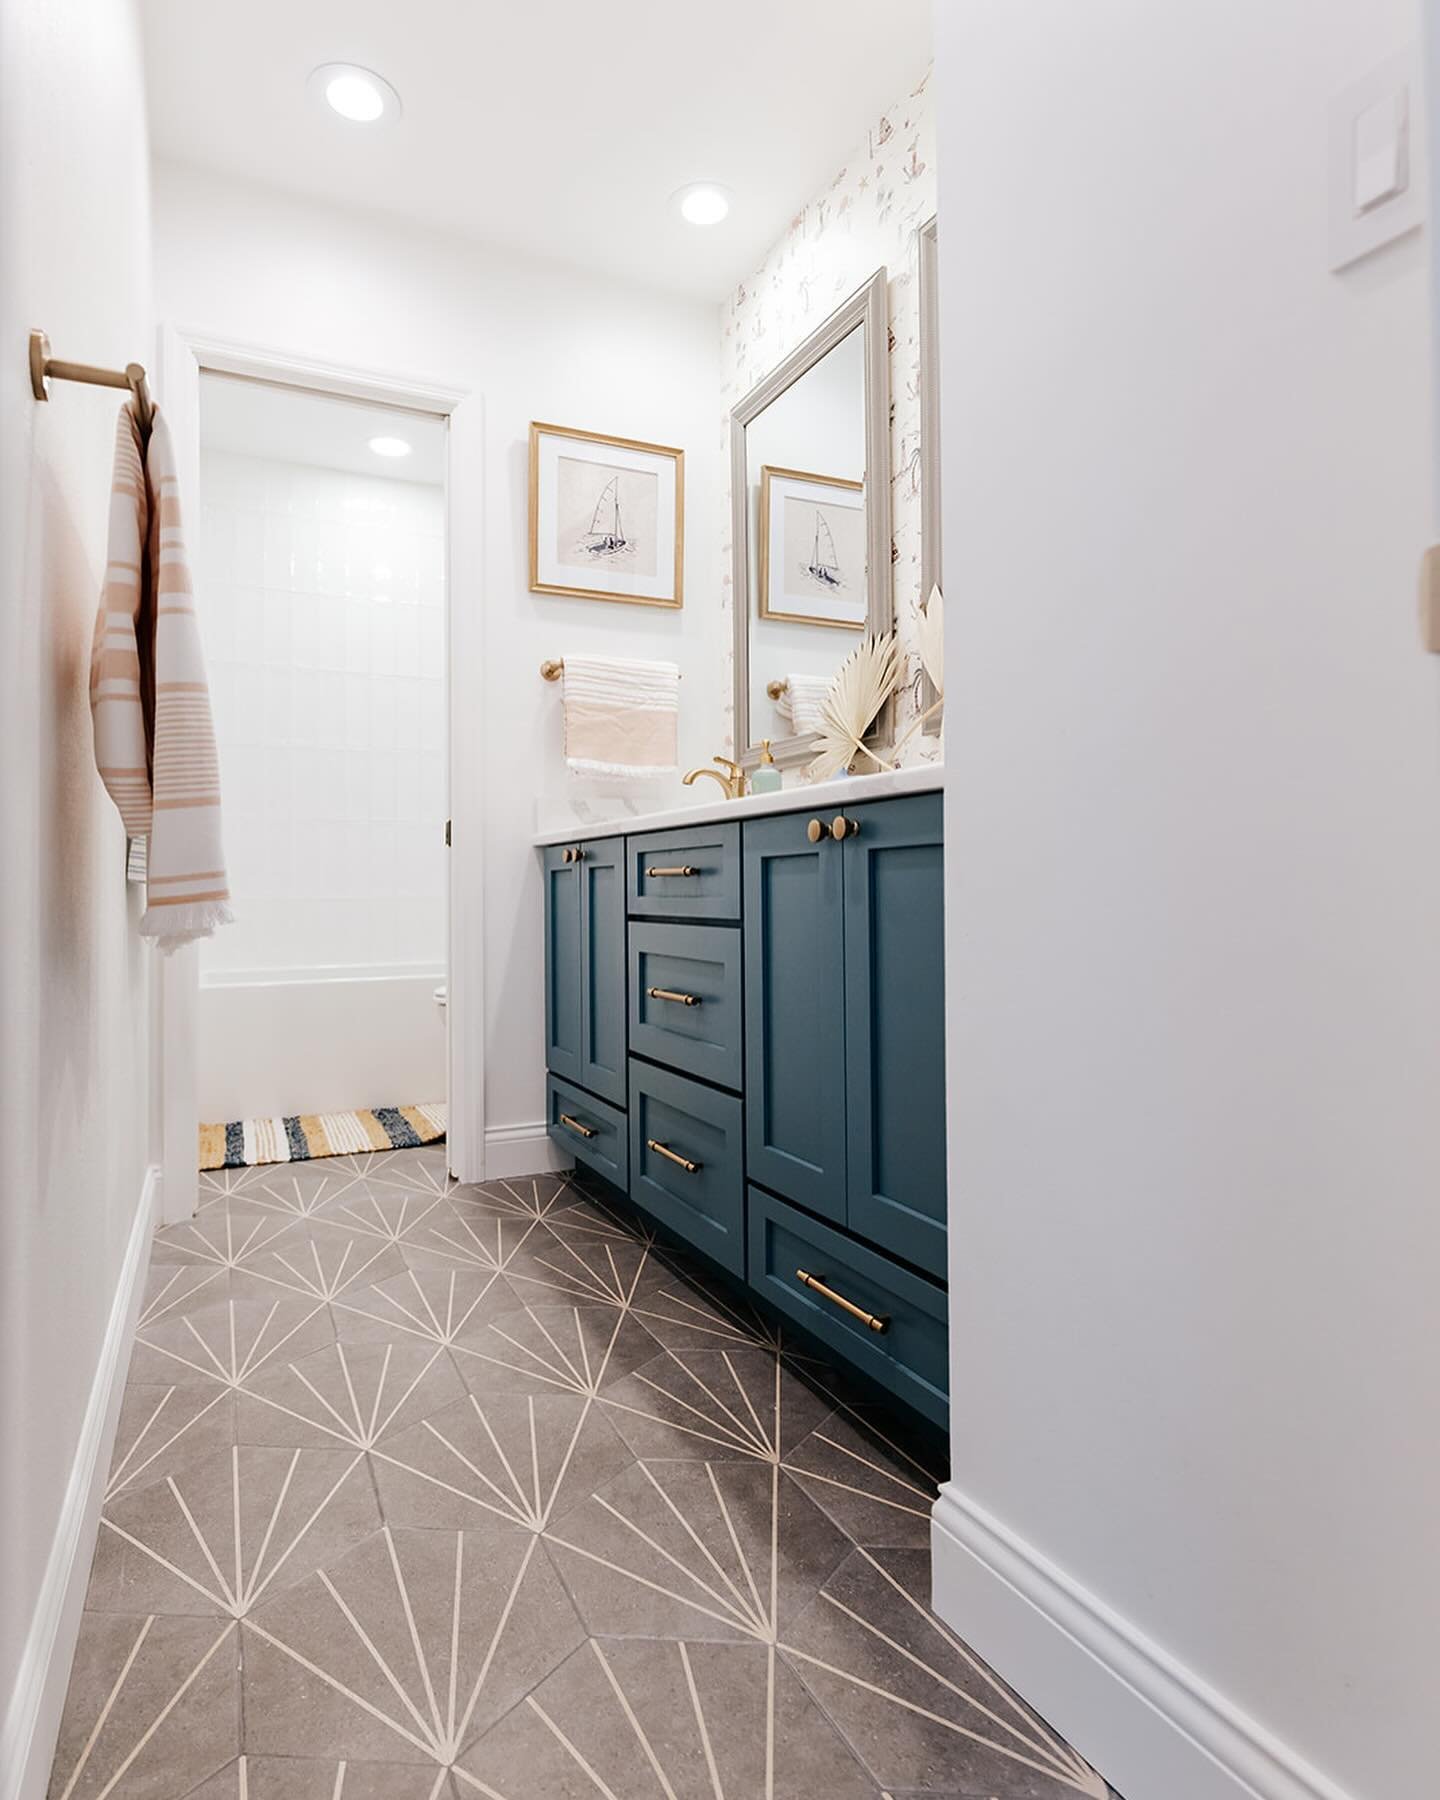 This kid&rsquo;s bathroom is all sorts of ideal. Not only did we refresh all the finishes and fixtures but we didn&rsquo;t have to do any major layout changes! We maximized how long the kiddos can enjoy this space without &ldquo;outgrowing&rdquo; it 